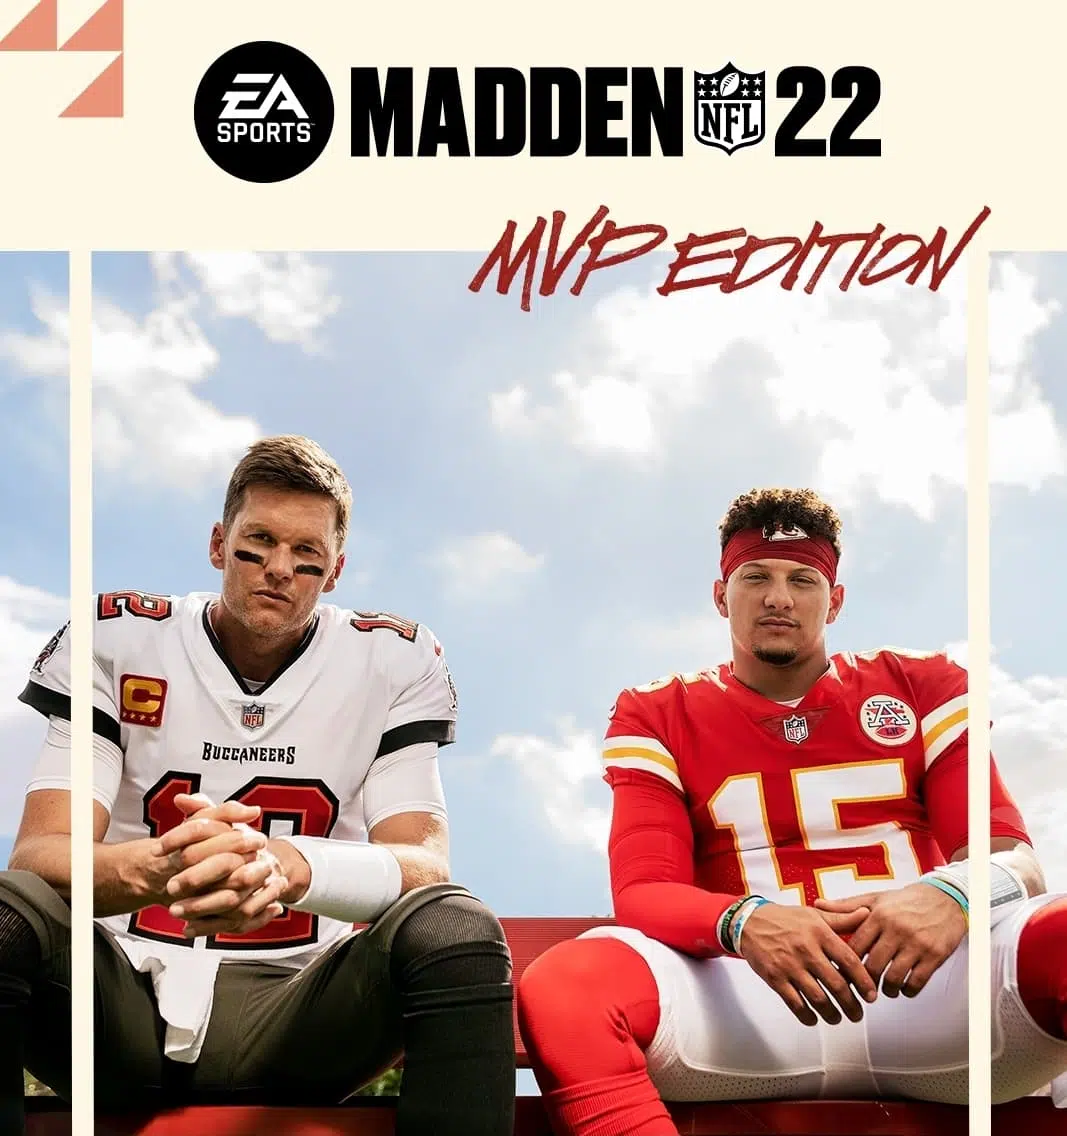 Electronic arts announces madden nfl 22 with an iconic cover that features both tom brady and patrick mahomes